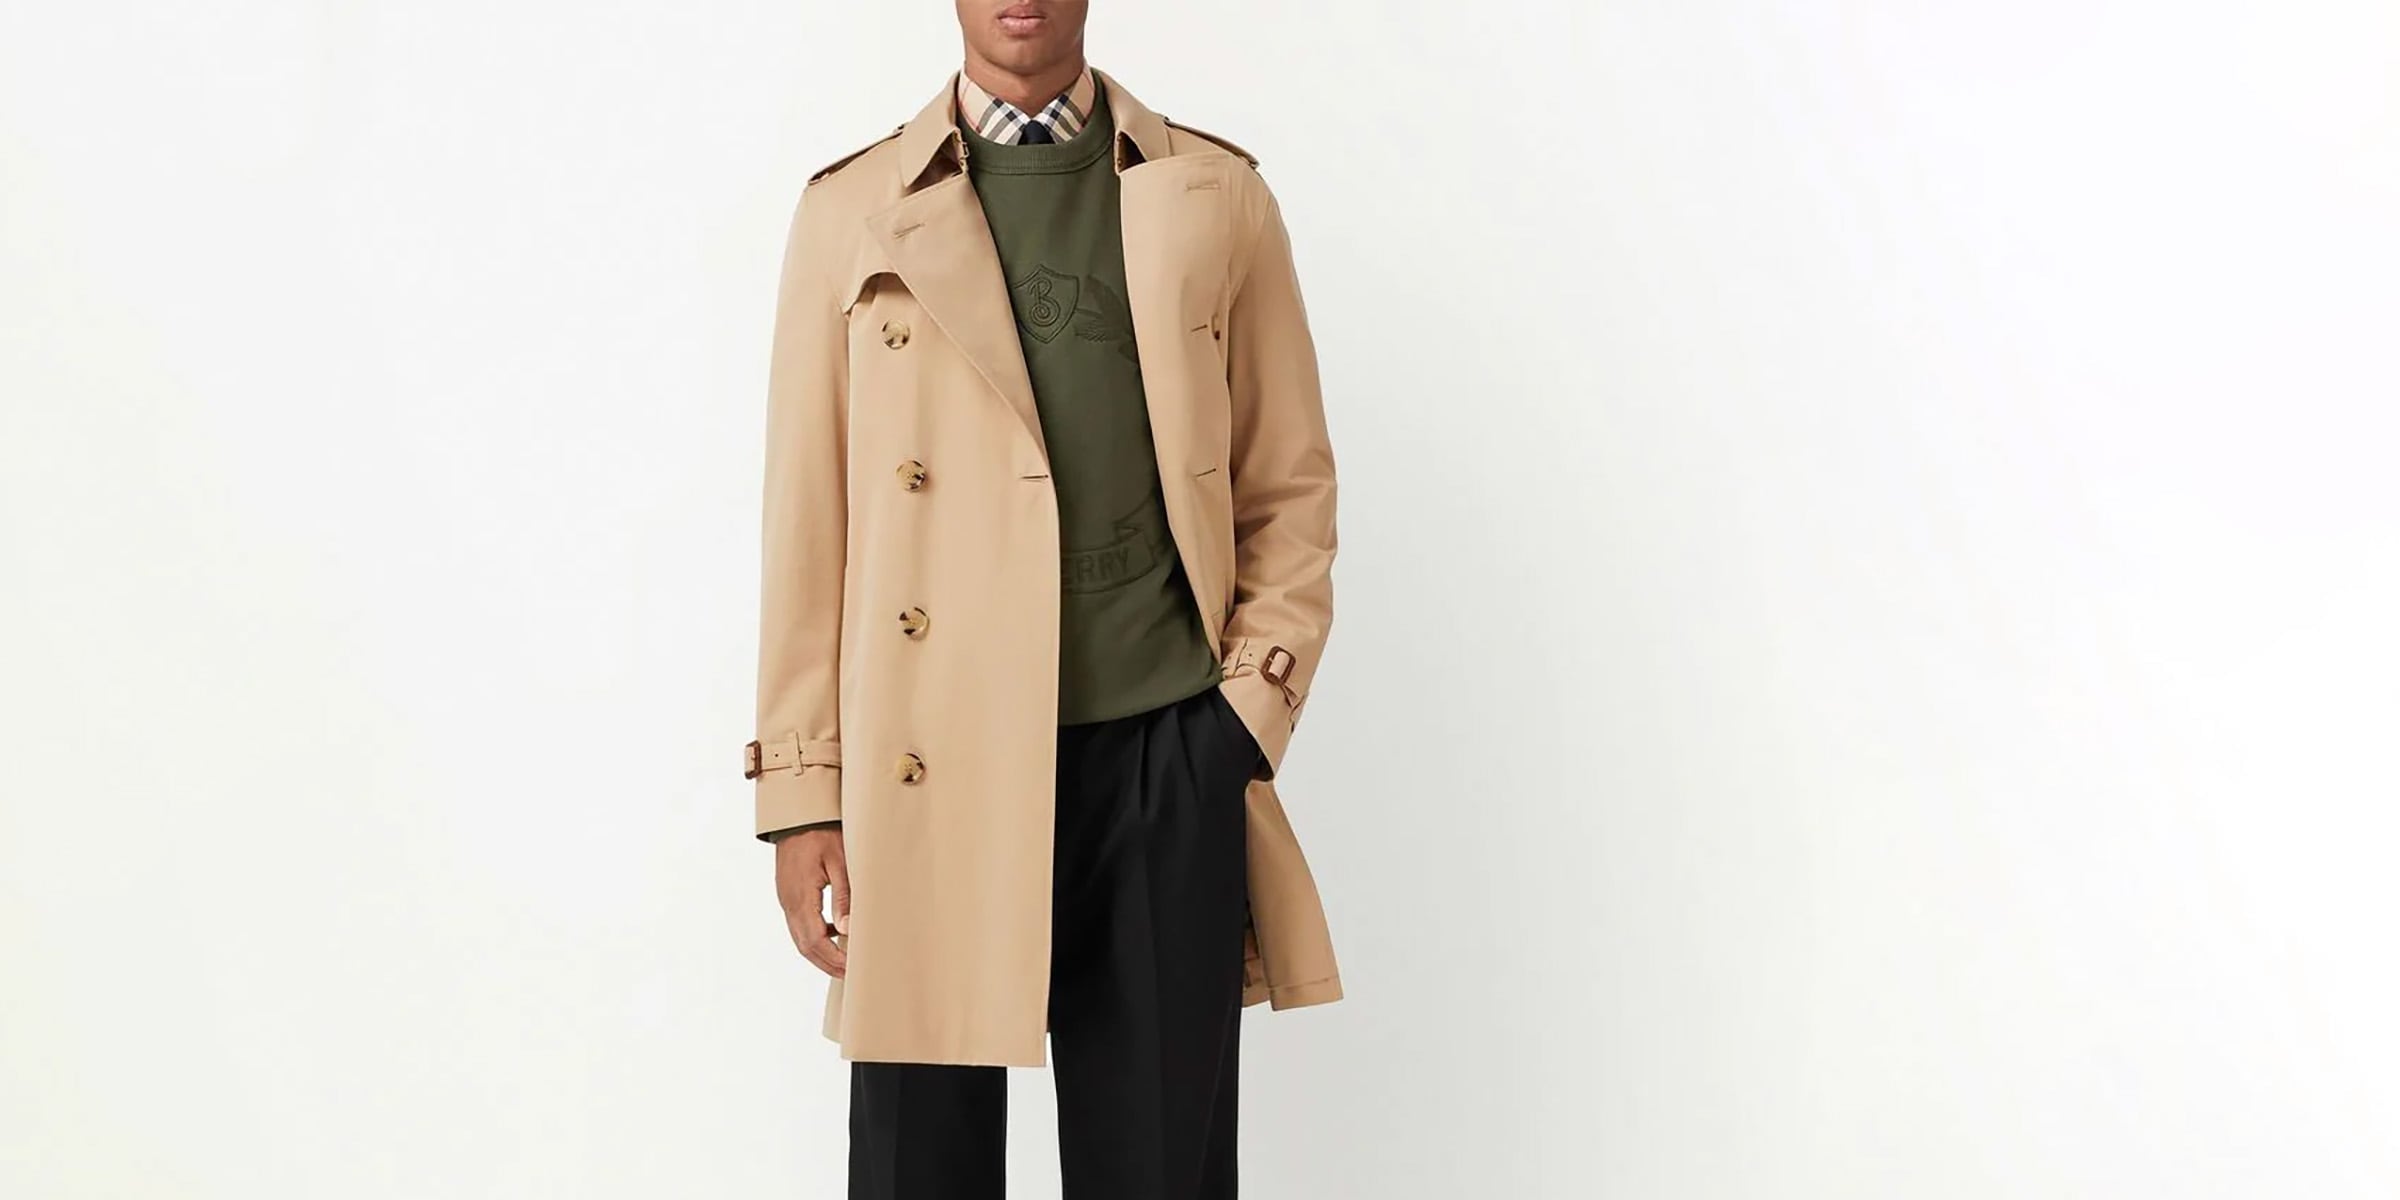 15 Best Trench Coats For Men: Classic to Modern (Buying Guide)